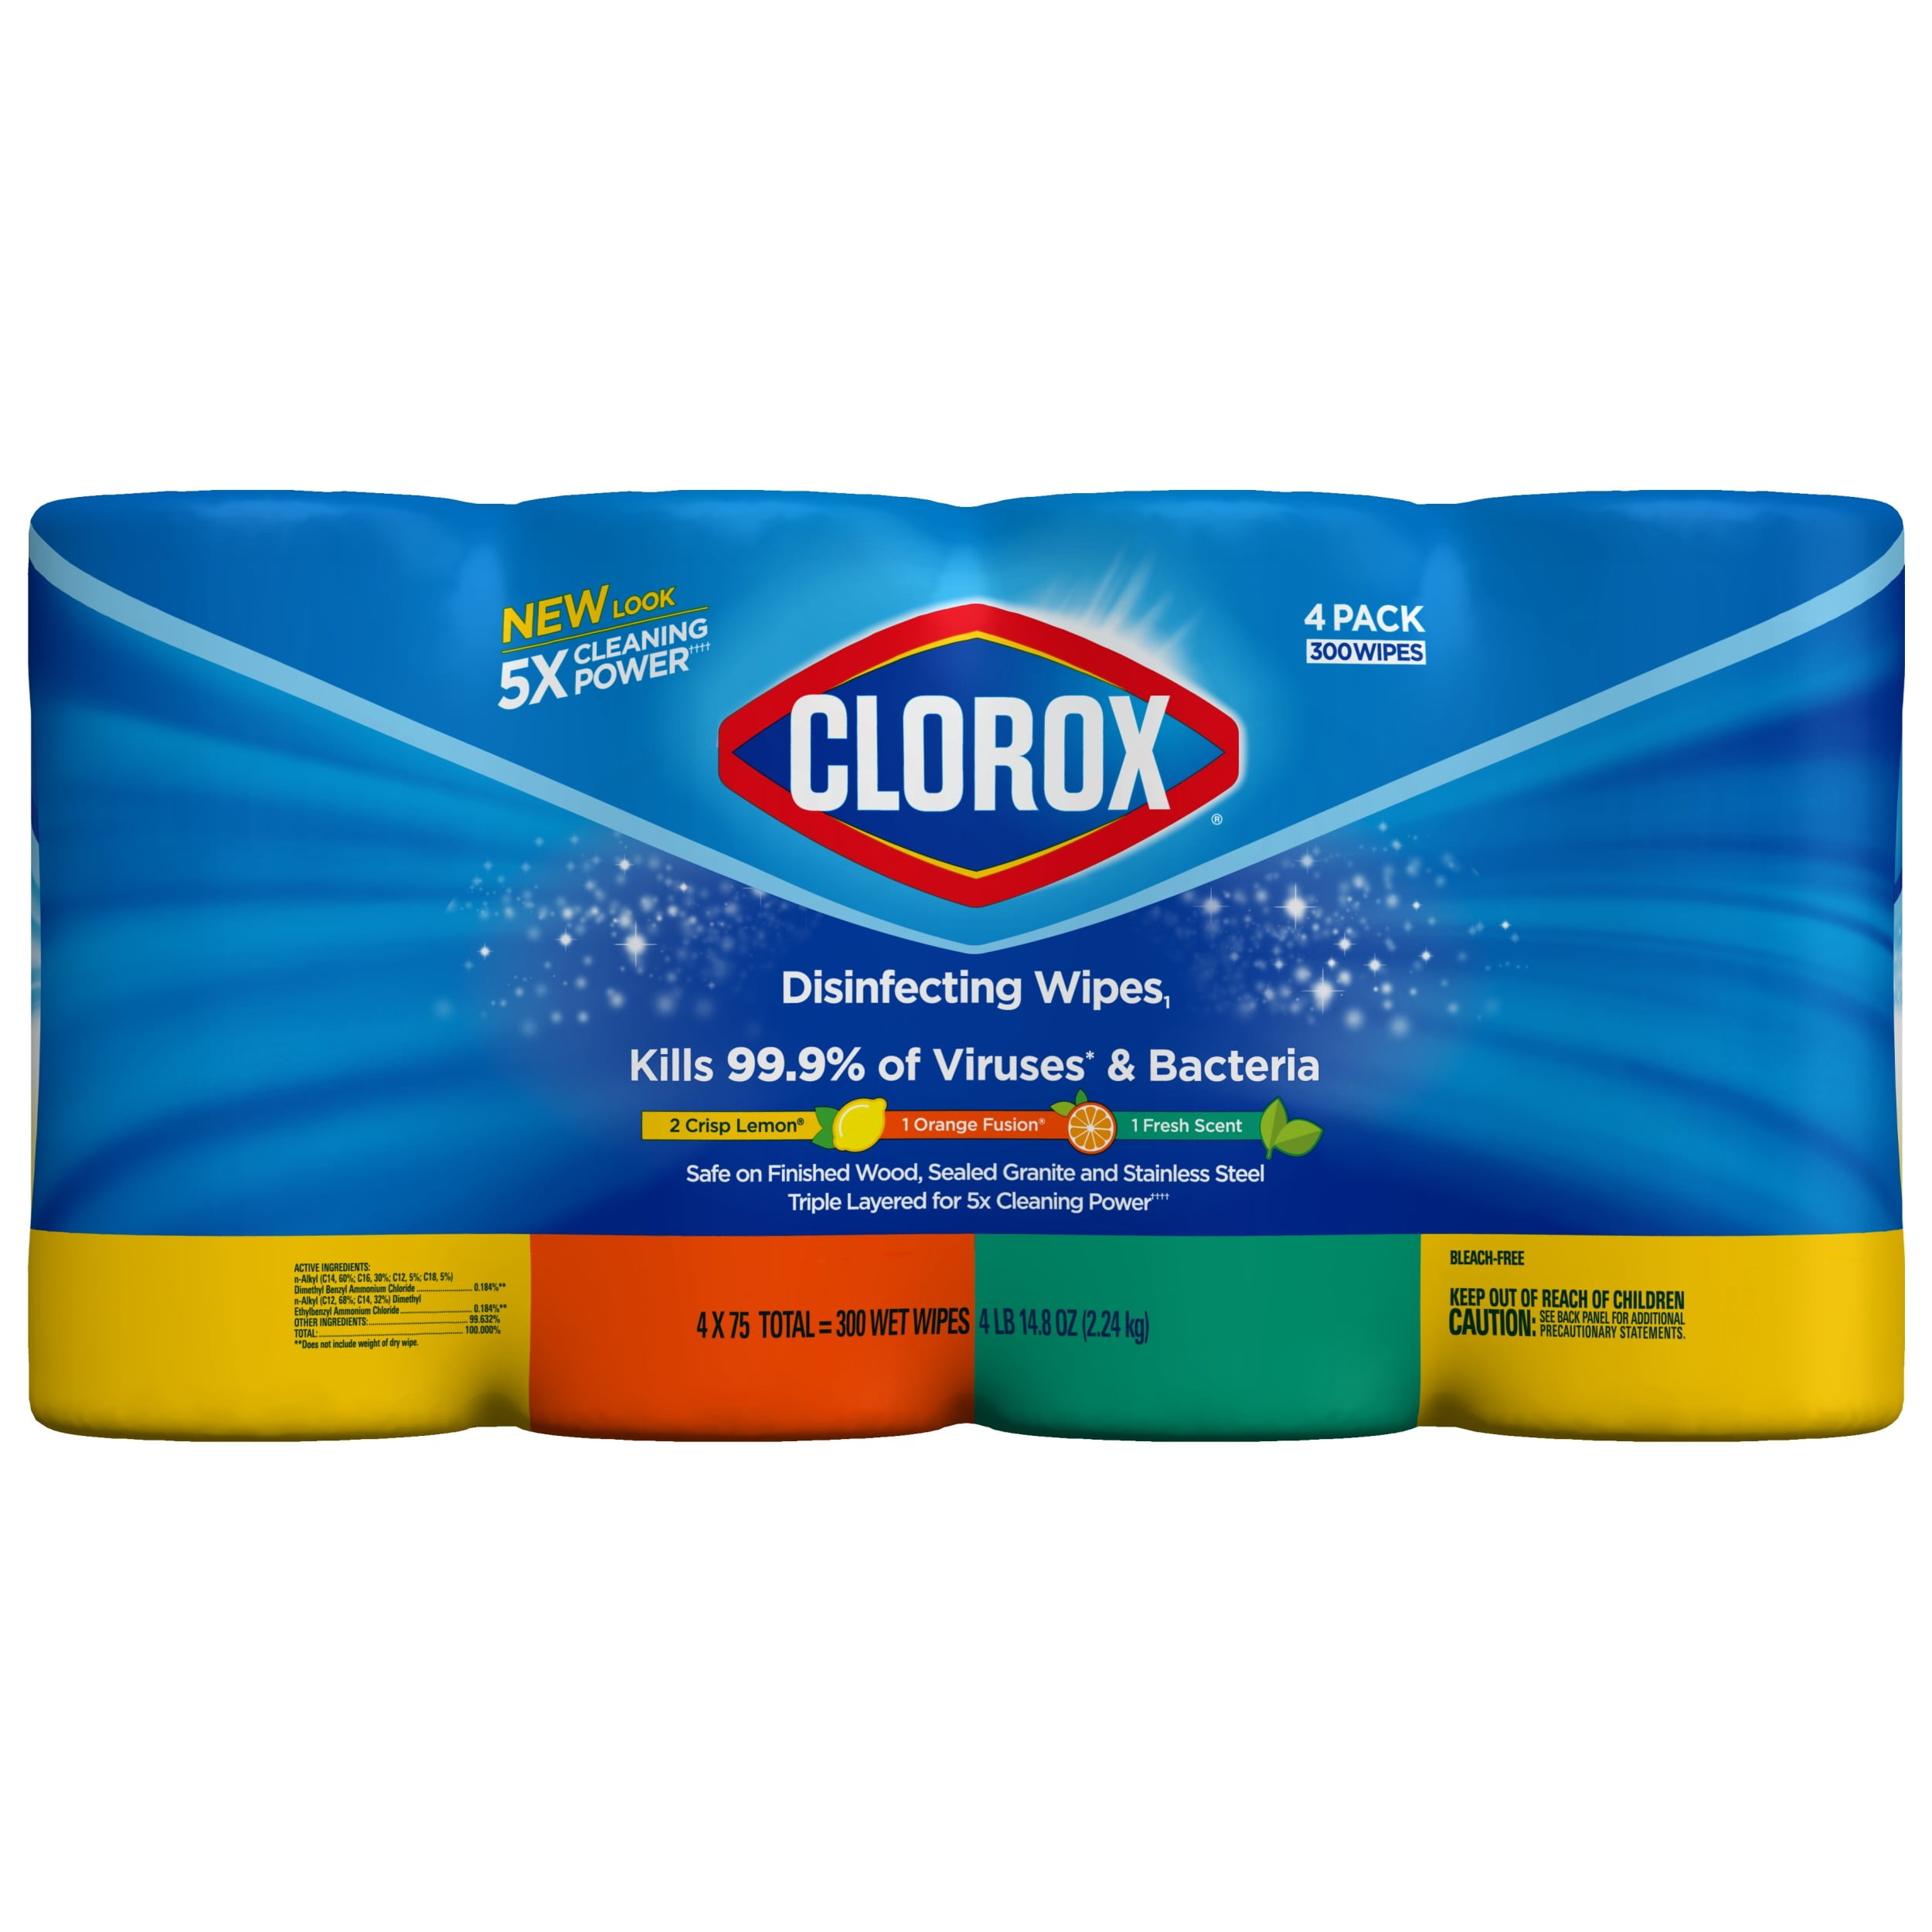 Clorox Disinfecting Wipes 300 Count Value Pack Bleach Free Cleaning Wipes 4 Pack 75 Count Each Walmart Com Walmart Com